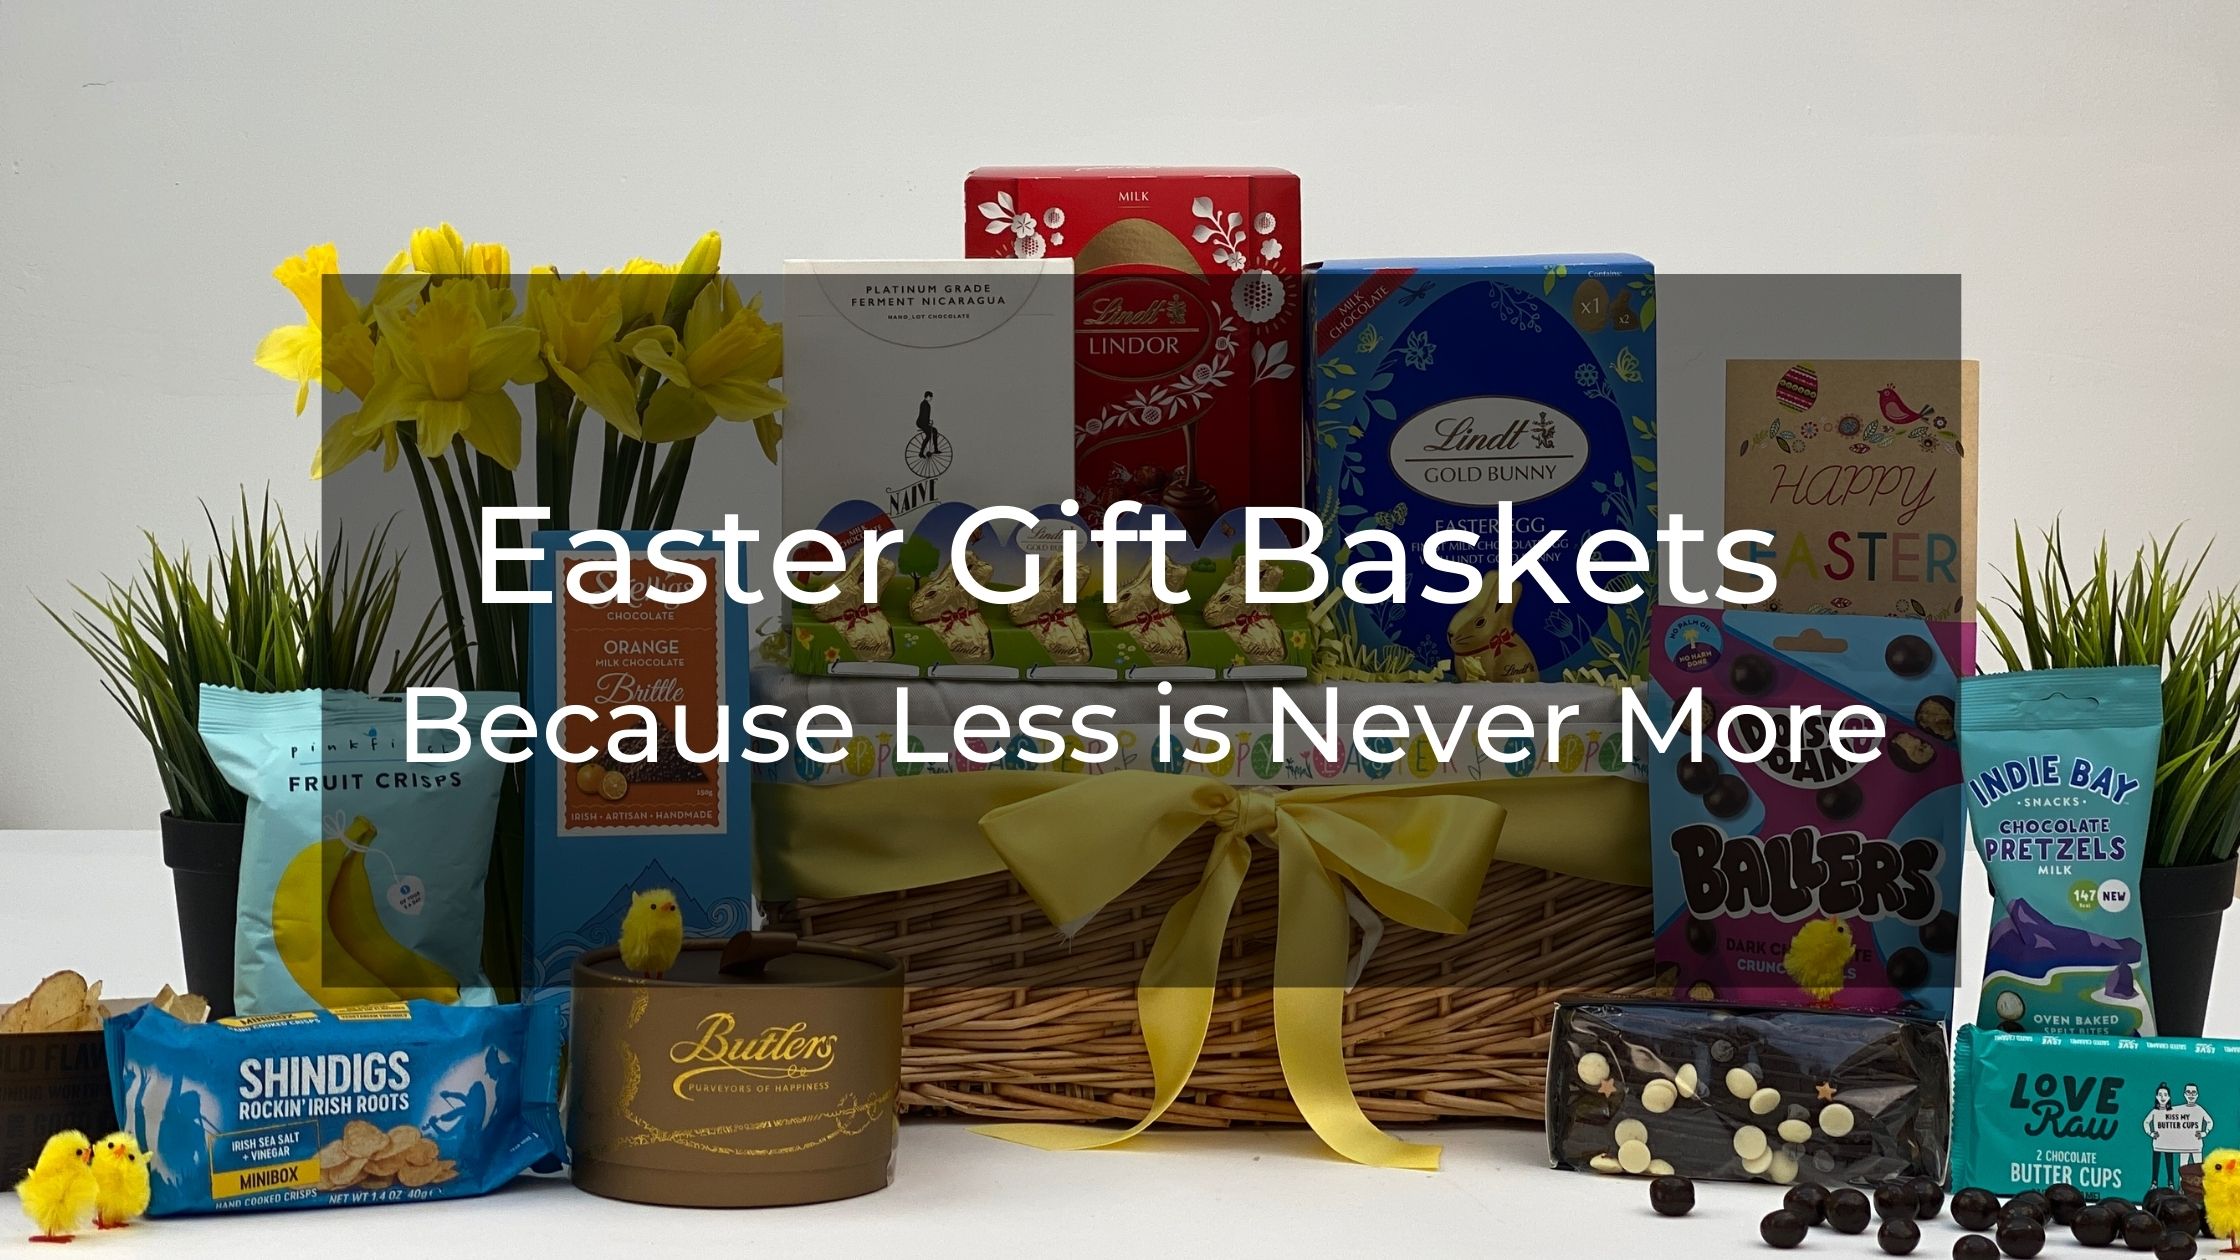 Easter Gift Basket - Because Less is Never More